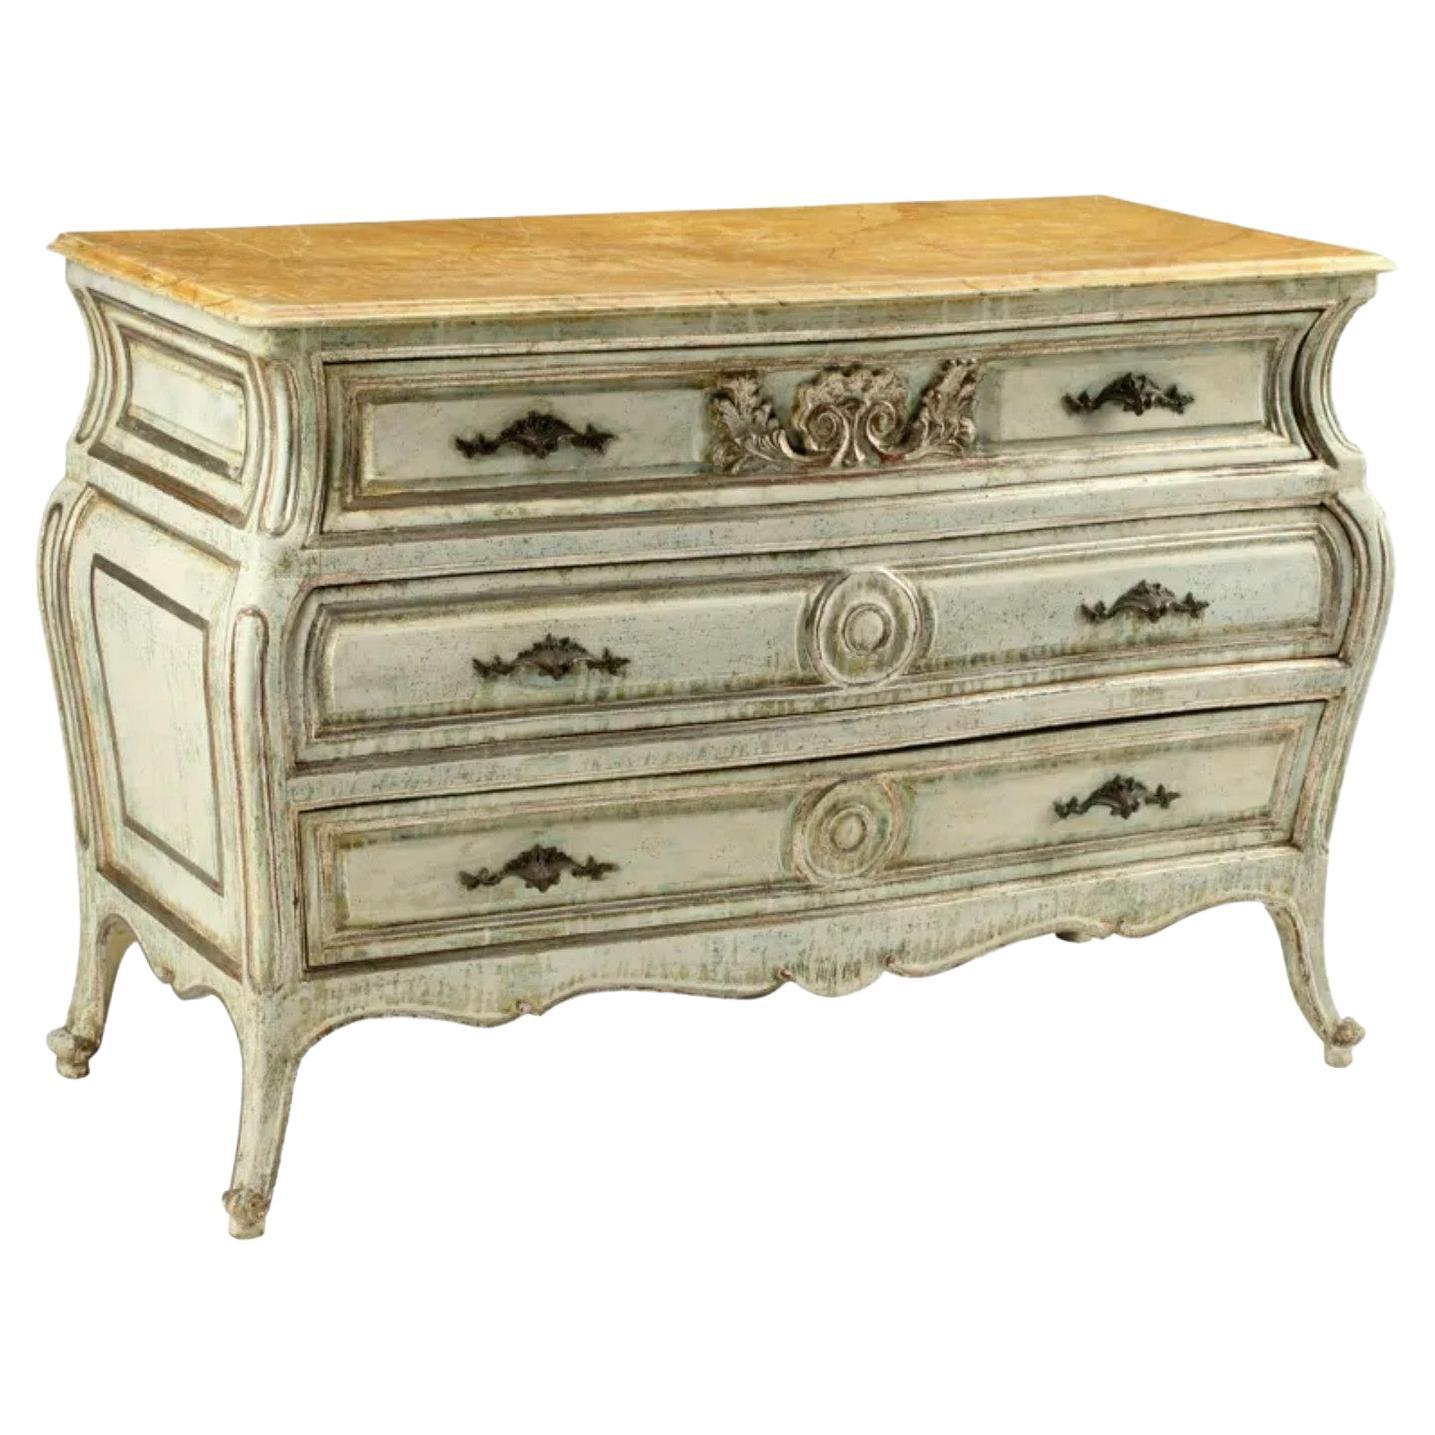 Vintage Louis XV Style Faux Marble Distressed Painted Bombe Chest of Drawers For Sale